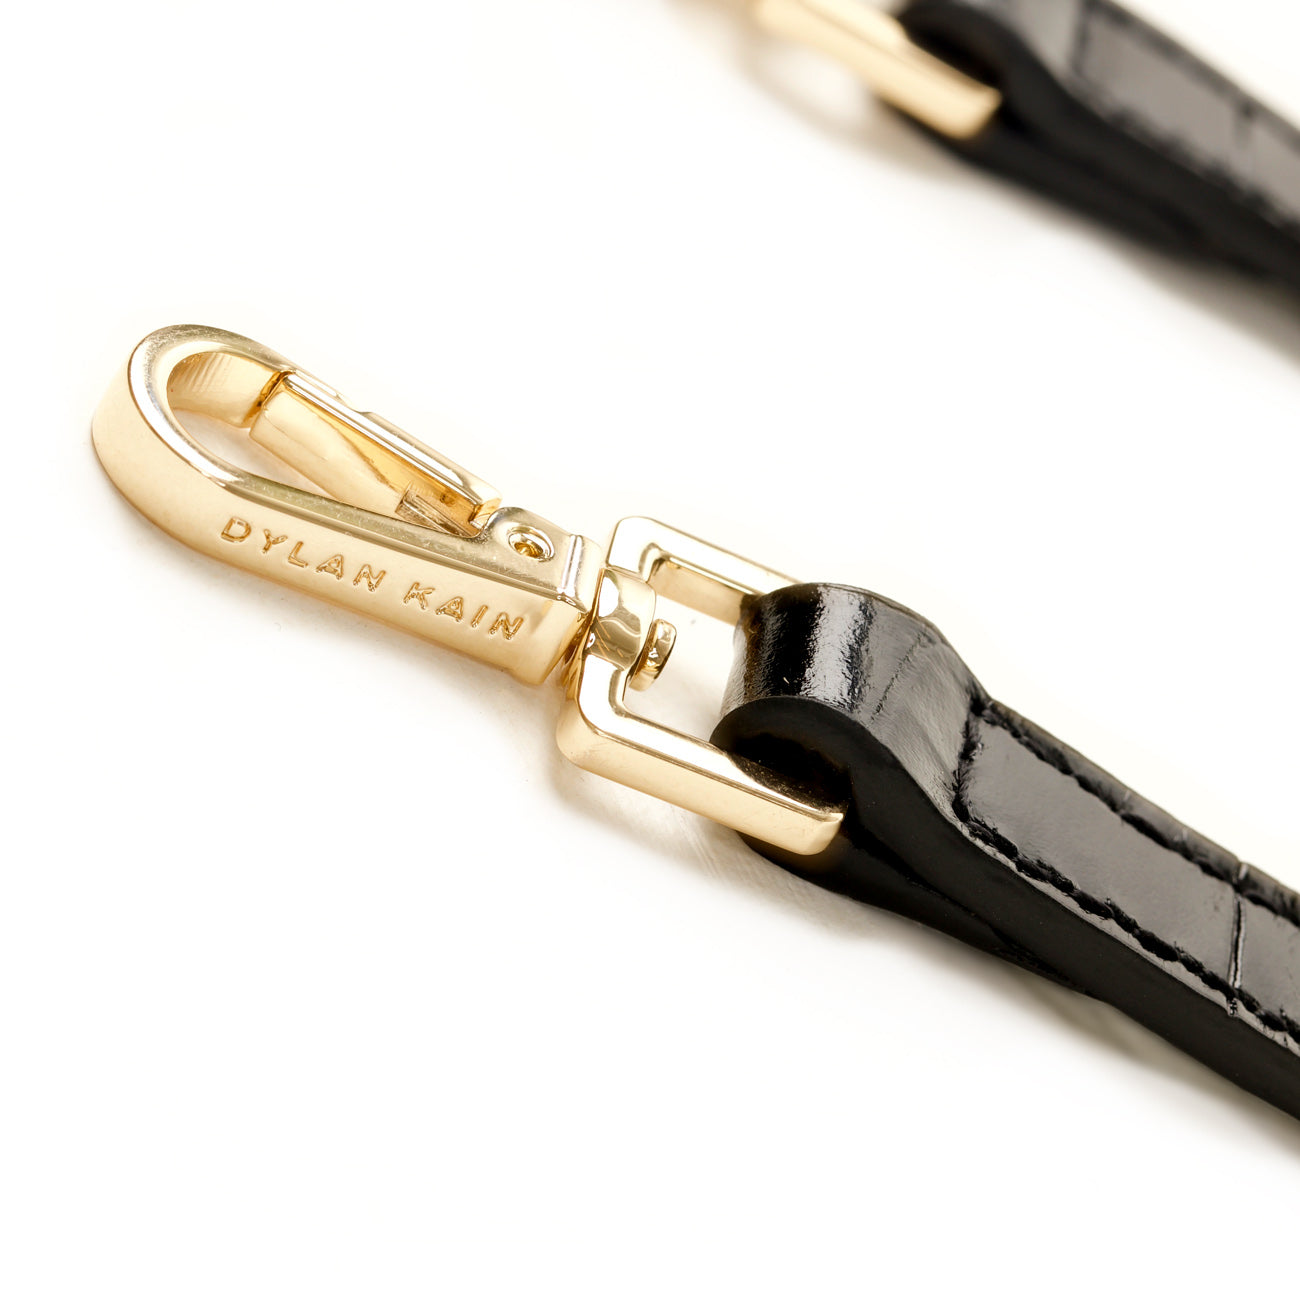 The Fixed 12mm Croc-effect Strap Light Gold